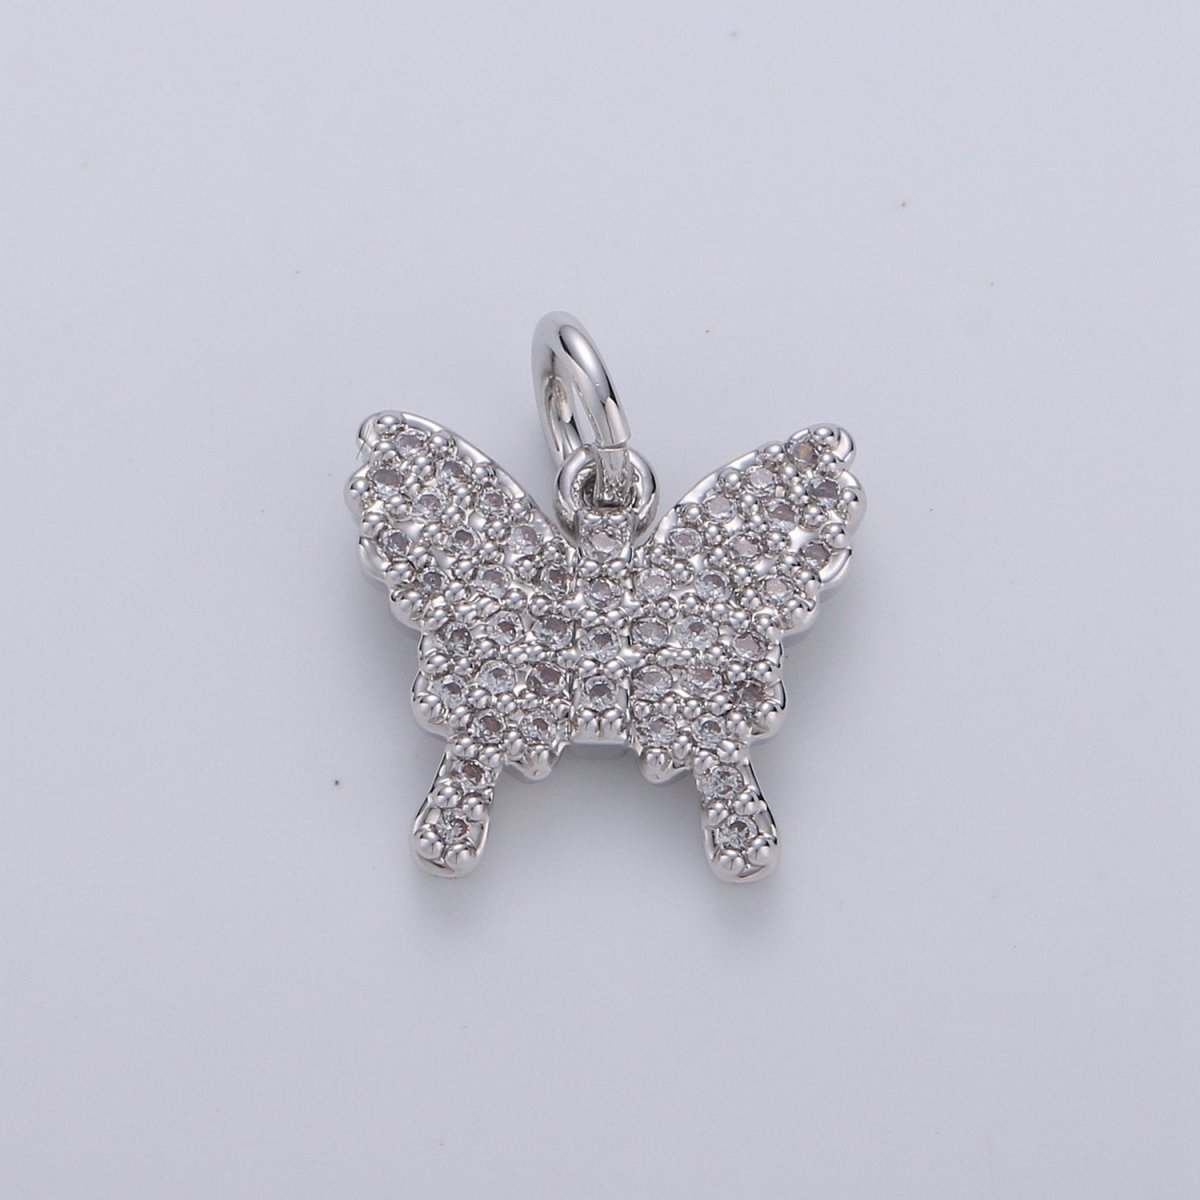 Mini 24k Gold Filled Micro Pave Butterfly Charm, Cubic Zirconia Mariposa Pendant Charm for Bracelet Earring Necklace jewelry Supply D-597 D-598 - DLUXCA